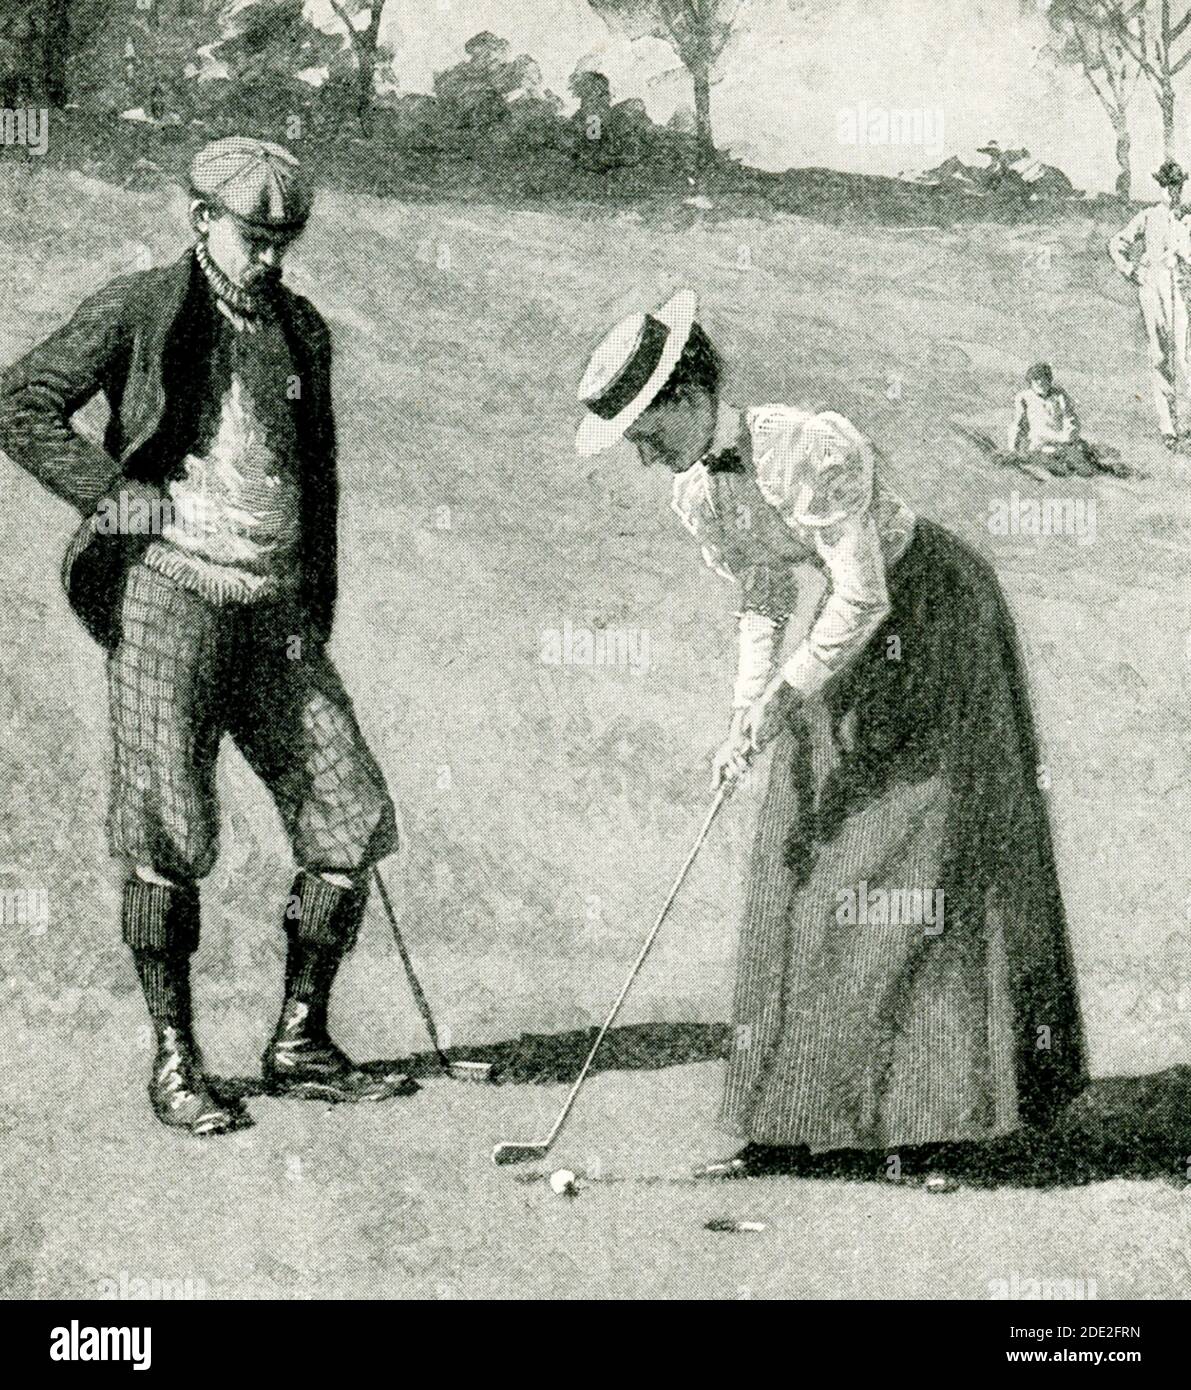 This 1897 illustration shows a man and woman on the green - playing golf. Stock Photo